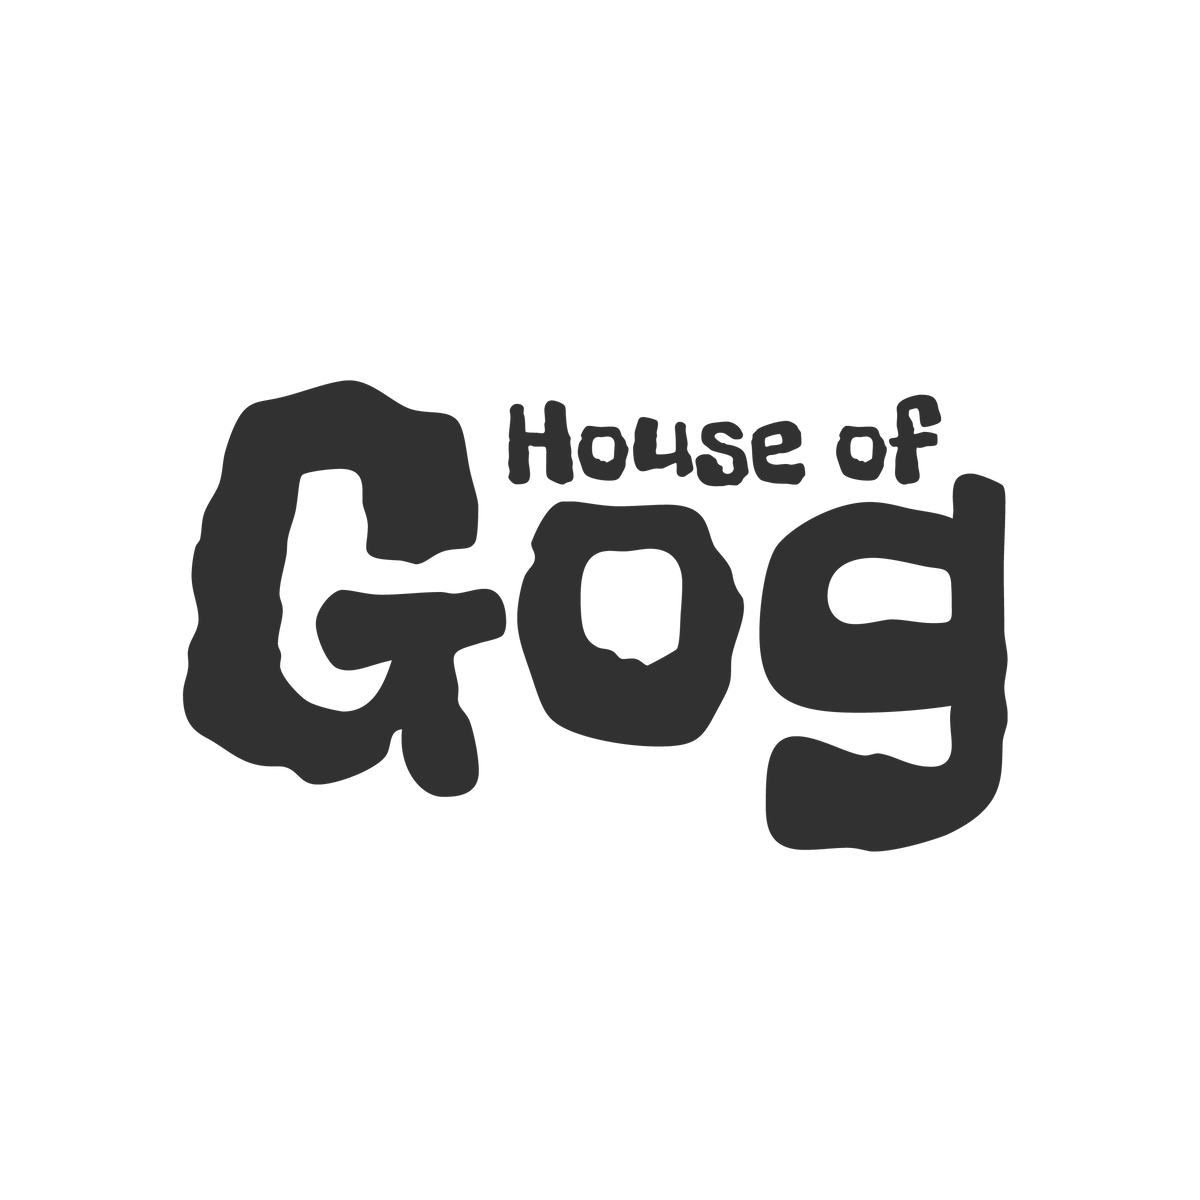 House of Gog